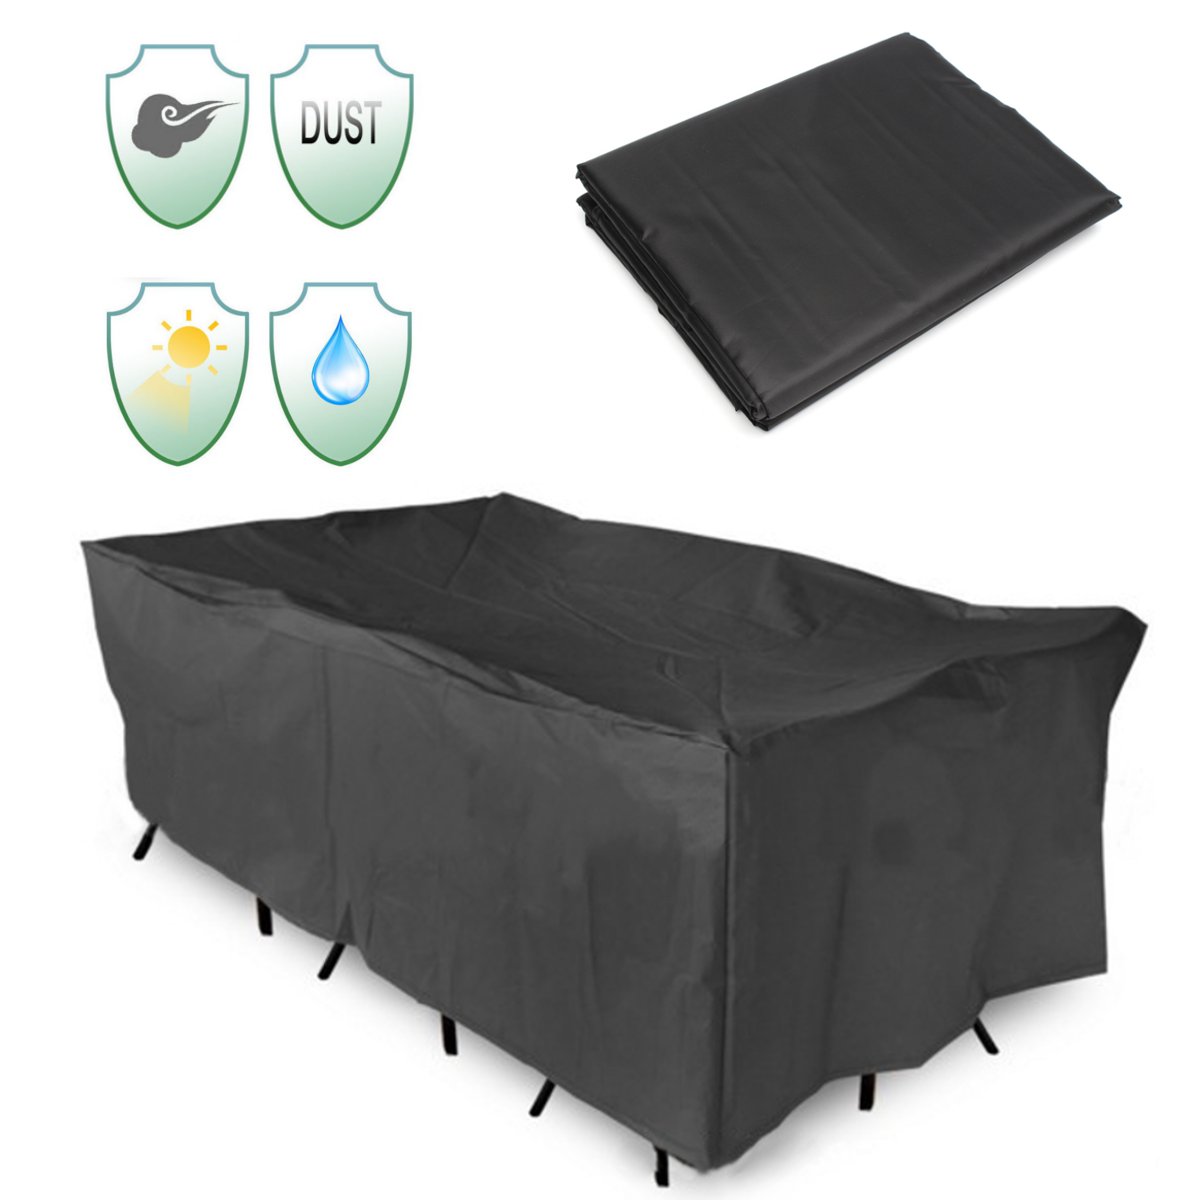 Outdoor Patio Table Cover All-Purpose Chair Set Furniture Cover Waterproof Garden Protective Dust Covers Canopy 3 Sizes Black